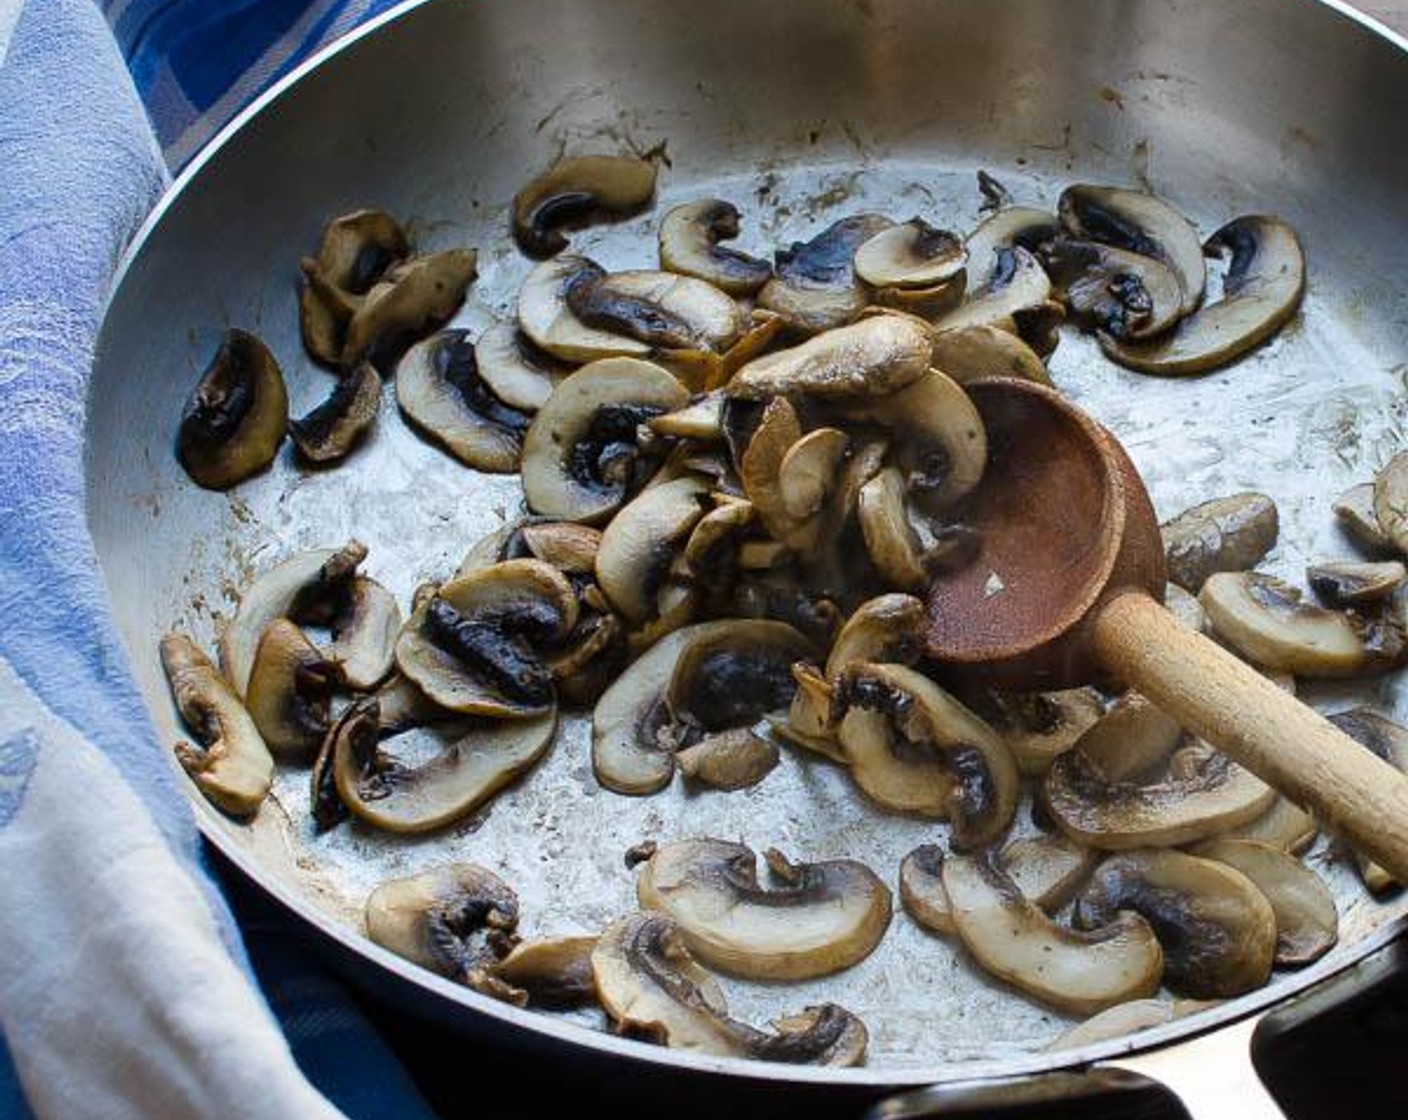 step 2 In a large saute pan over medium high heat add the Olive Oil (1 Tbsp) and Mushrooms (4 1/2 cups). Saute until the mushrooms brown and give up most of their liquid.